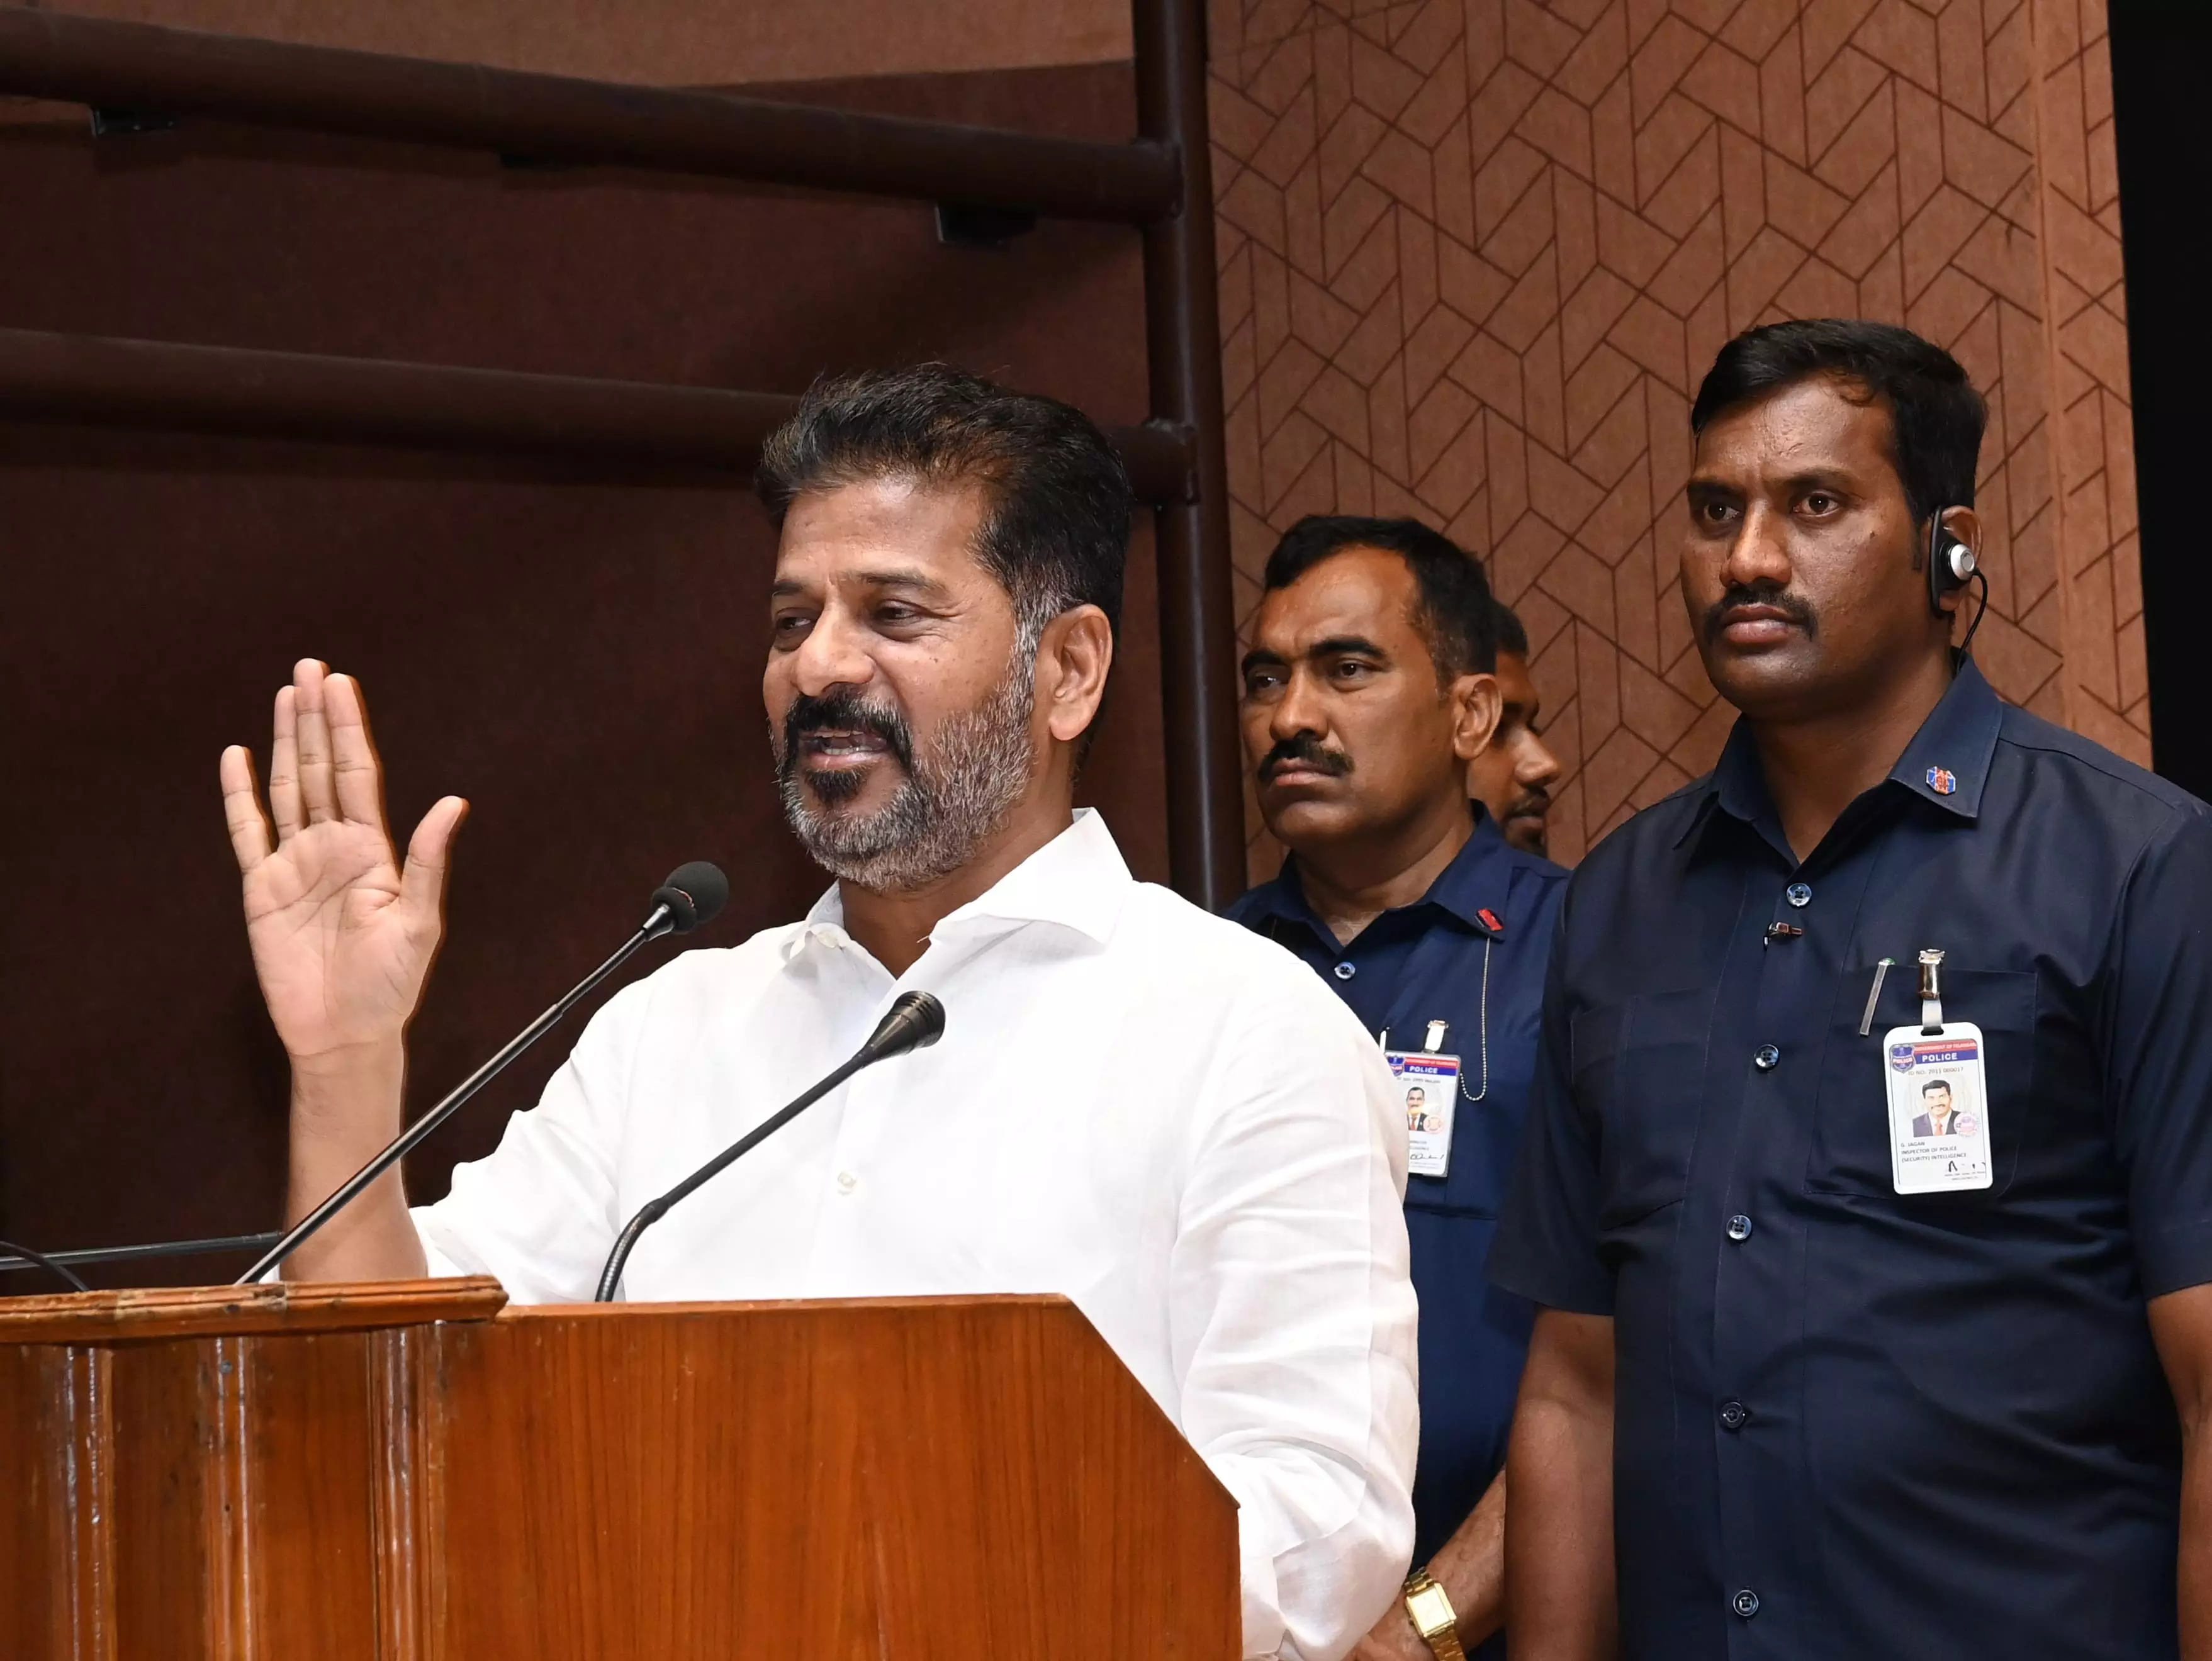 Employee Association Will Be Given Top Priority, Says Revanth Reddy